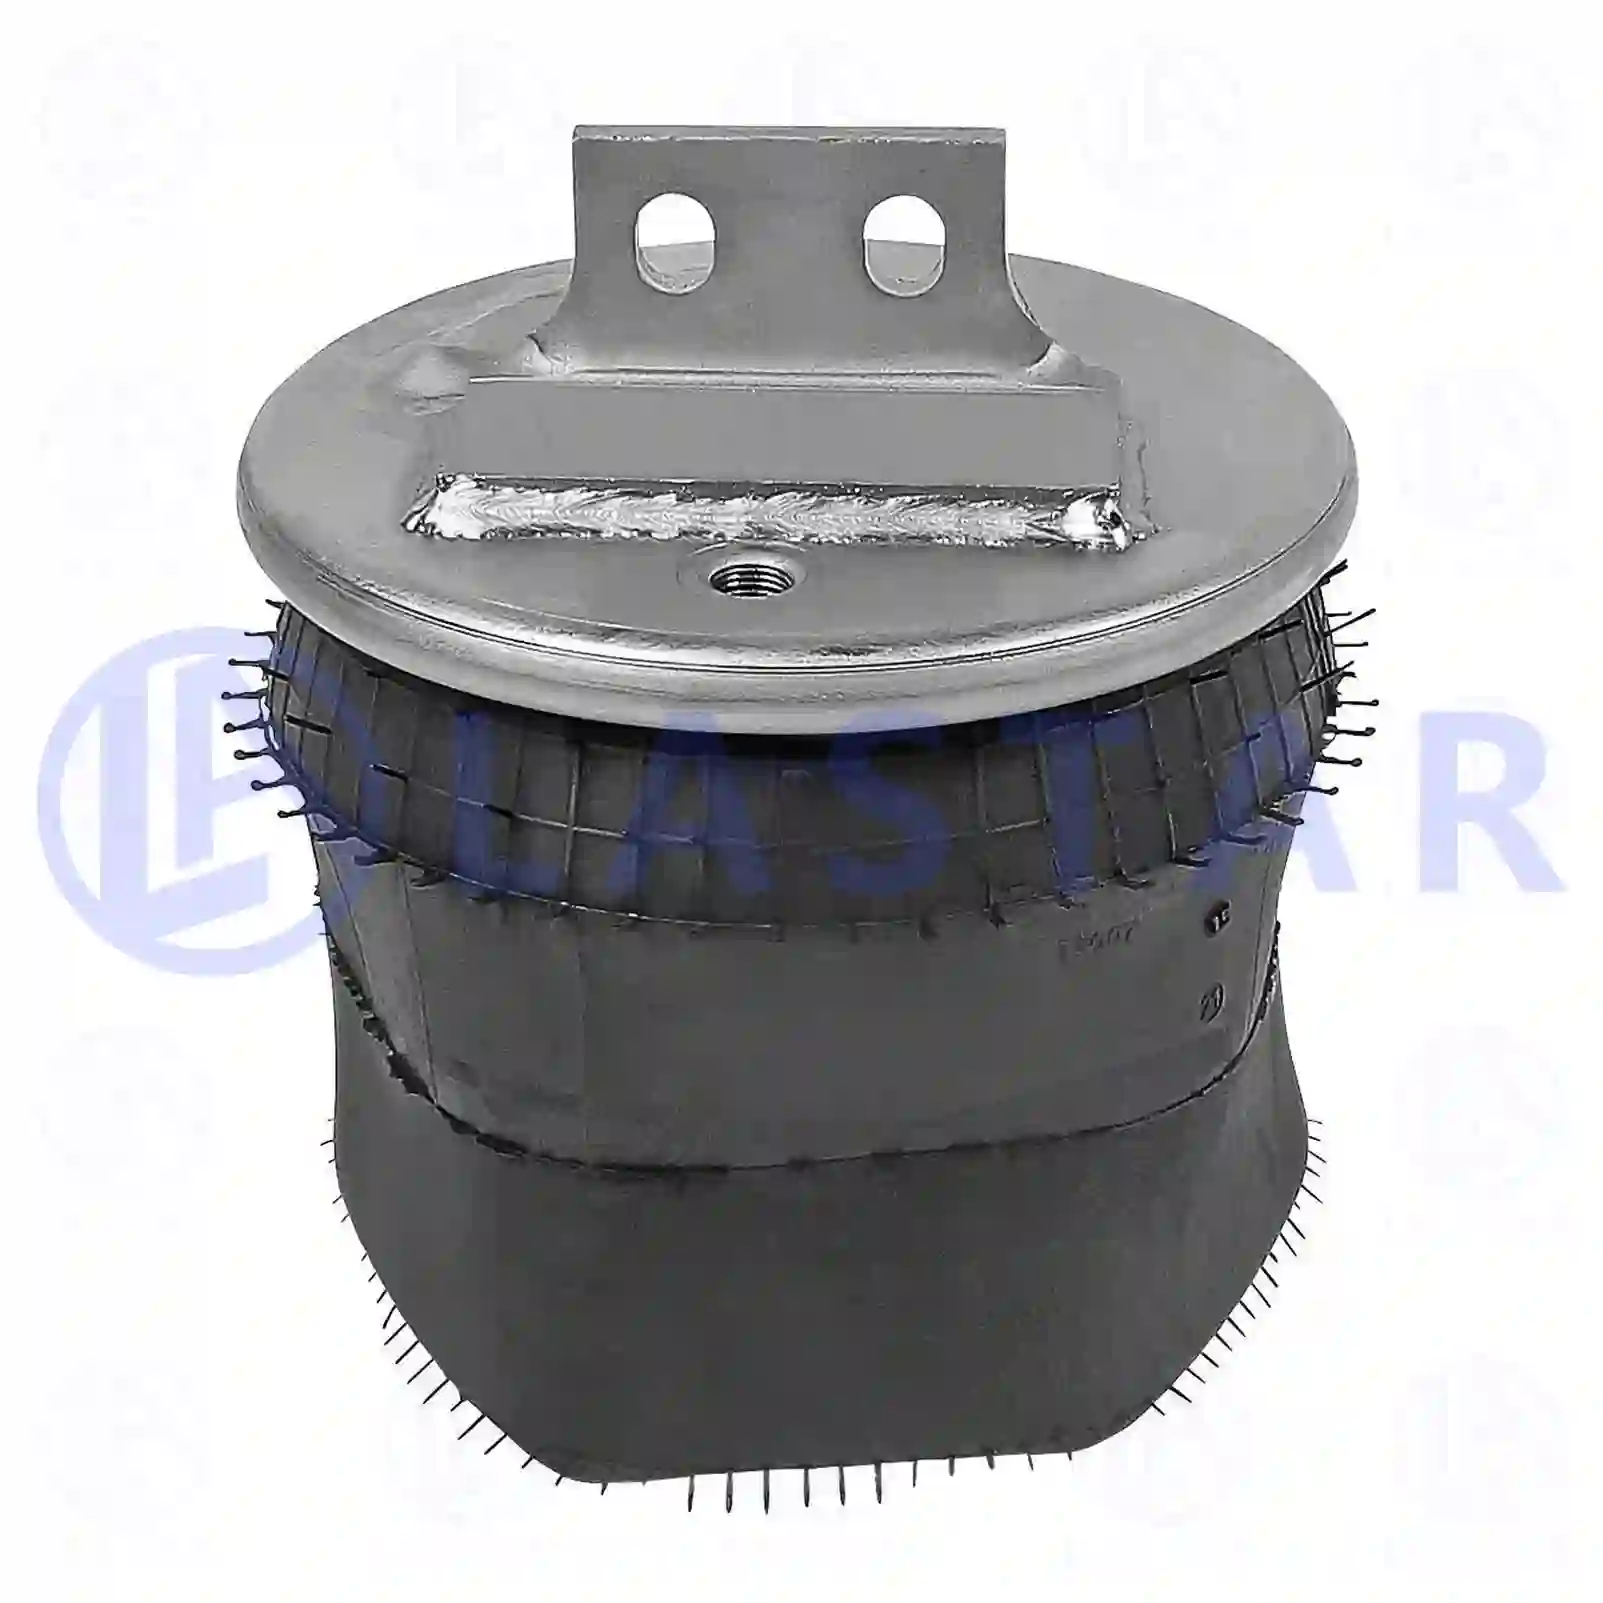 Air spring, without piston, 77729312, 42559766 ||  77729312 Lastar Spare Part | Truck Spare Parts, Auotomotive Spare Parts Air spring, without piston, 77729312, 42559766 ||  77729312 Lastar Spare Part | Truck Spare Parts, Auotomotive Spare Parts